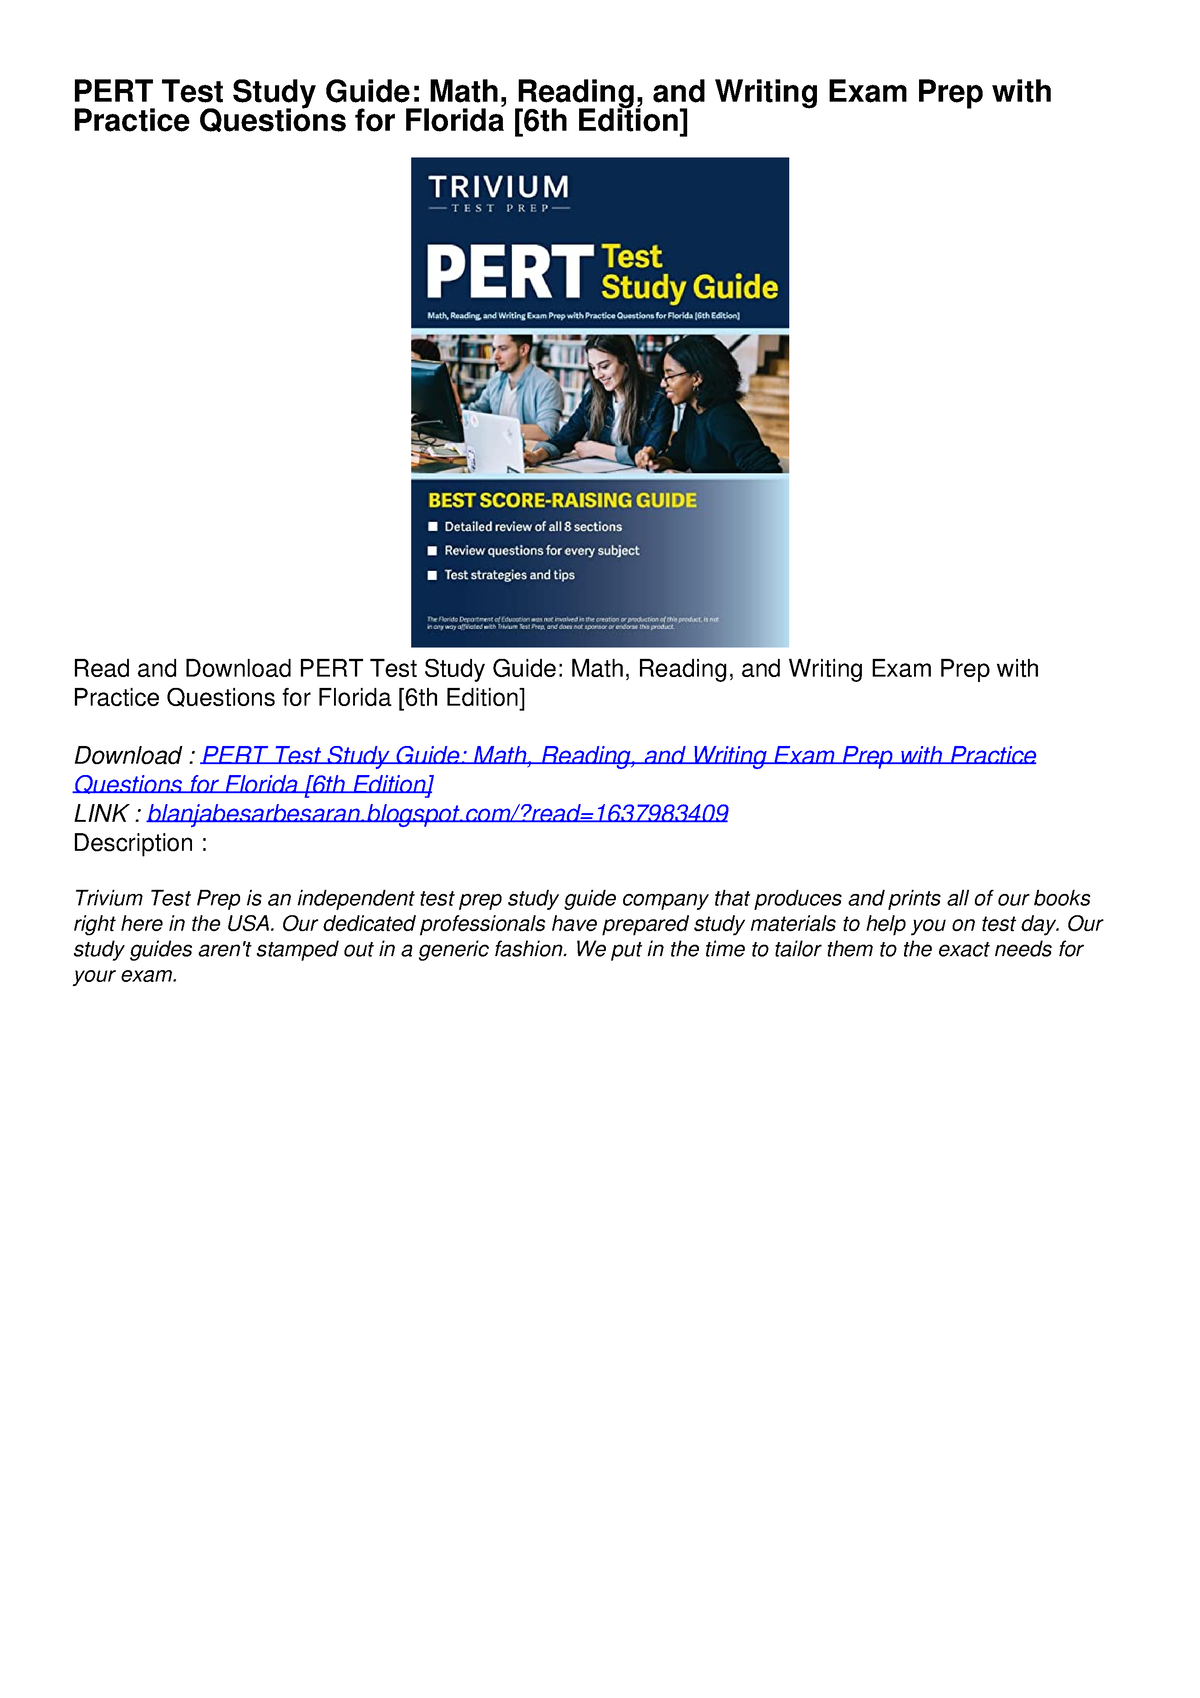 PDF PERT Test Study Guide Math, Reading, and Writing Exam Prep with